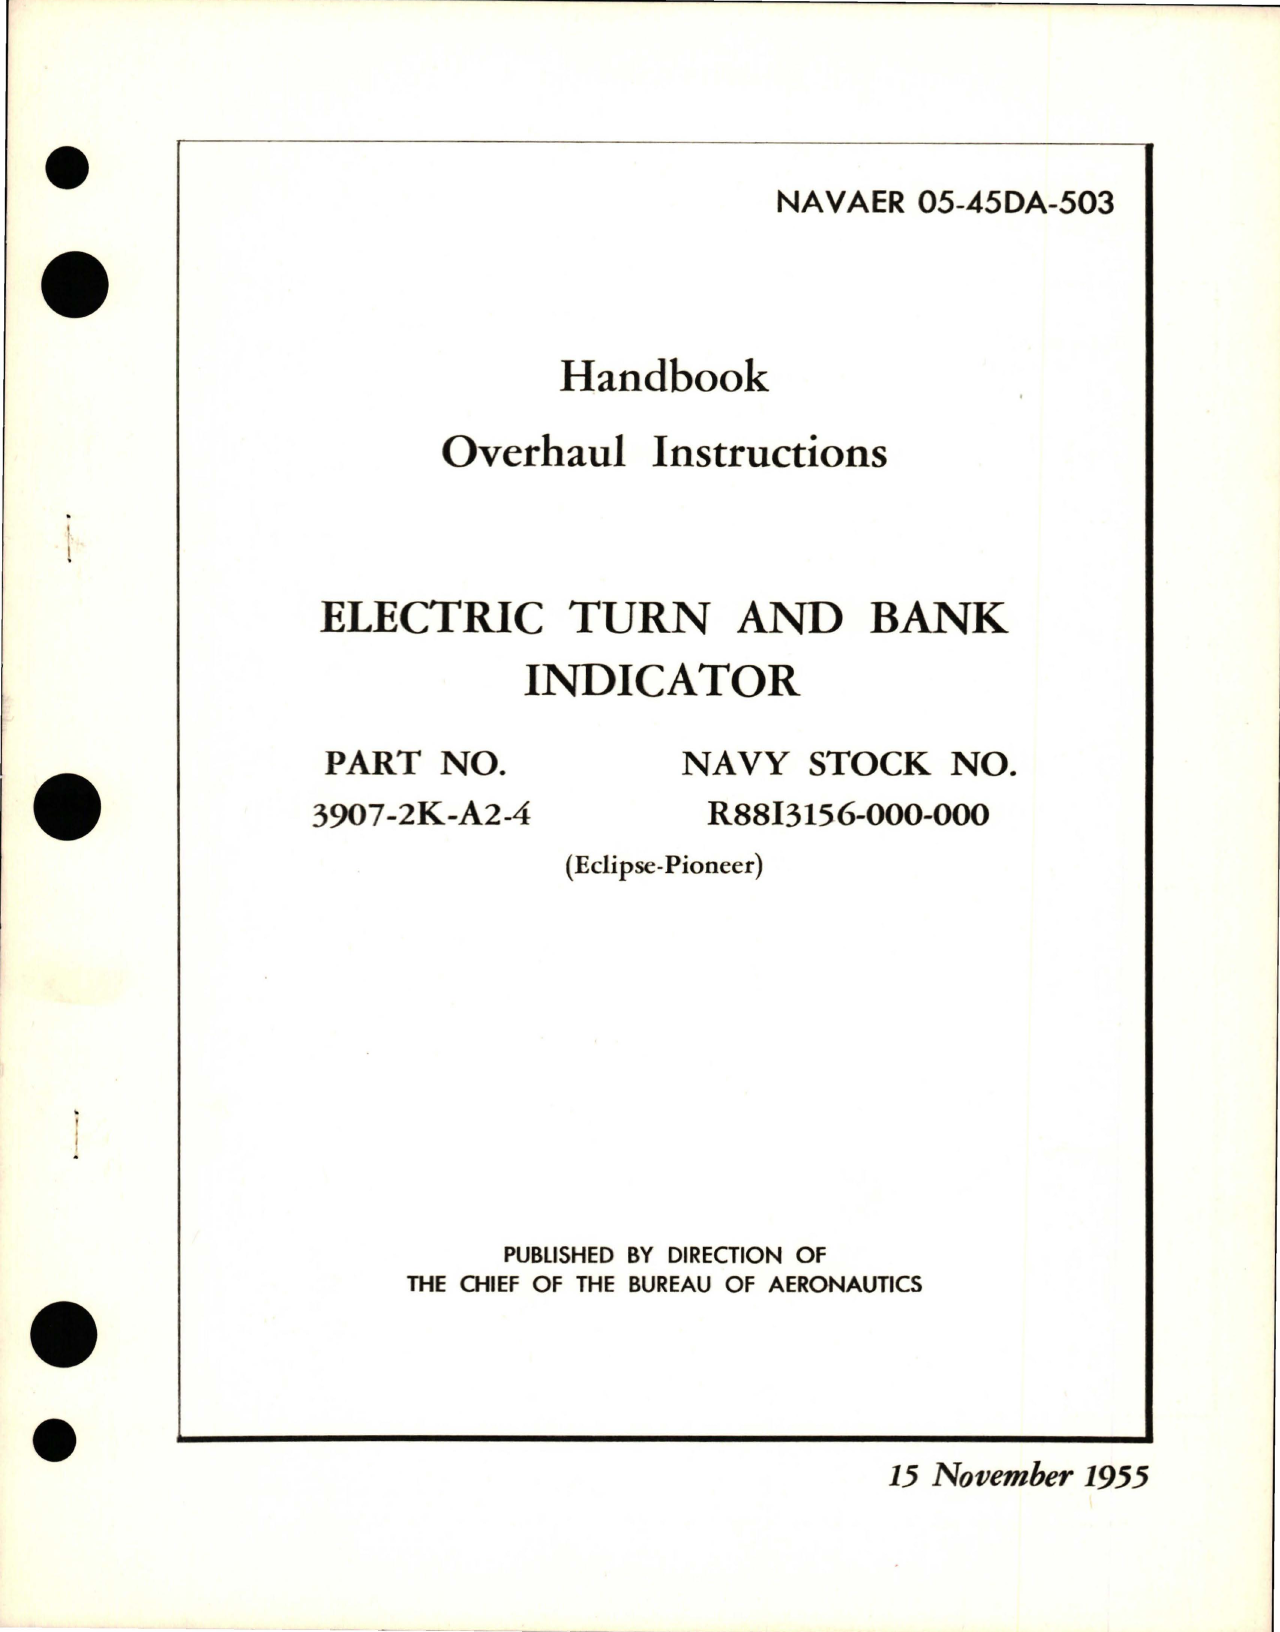 Sample page 1 from AirCorps Library document: Overhaul Instructions for Electric Turn and Bank Indicator - Part 3907-2K-A2-4